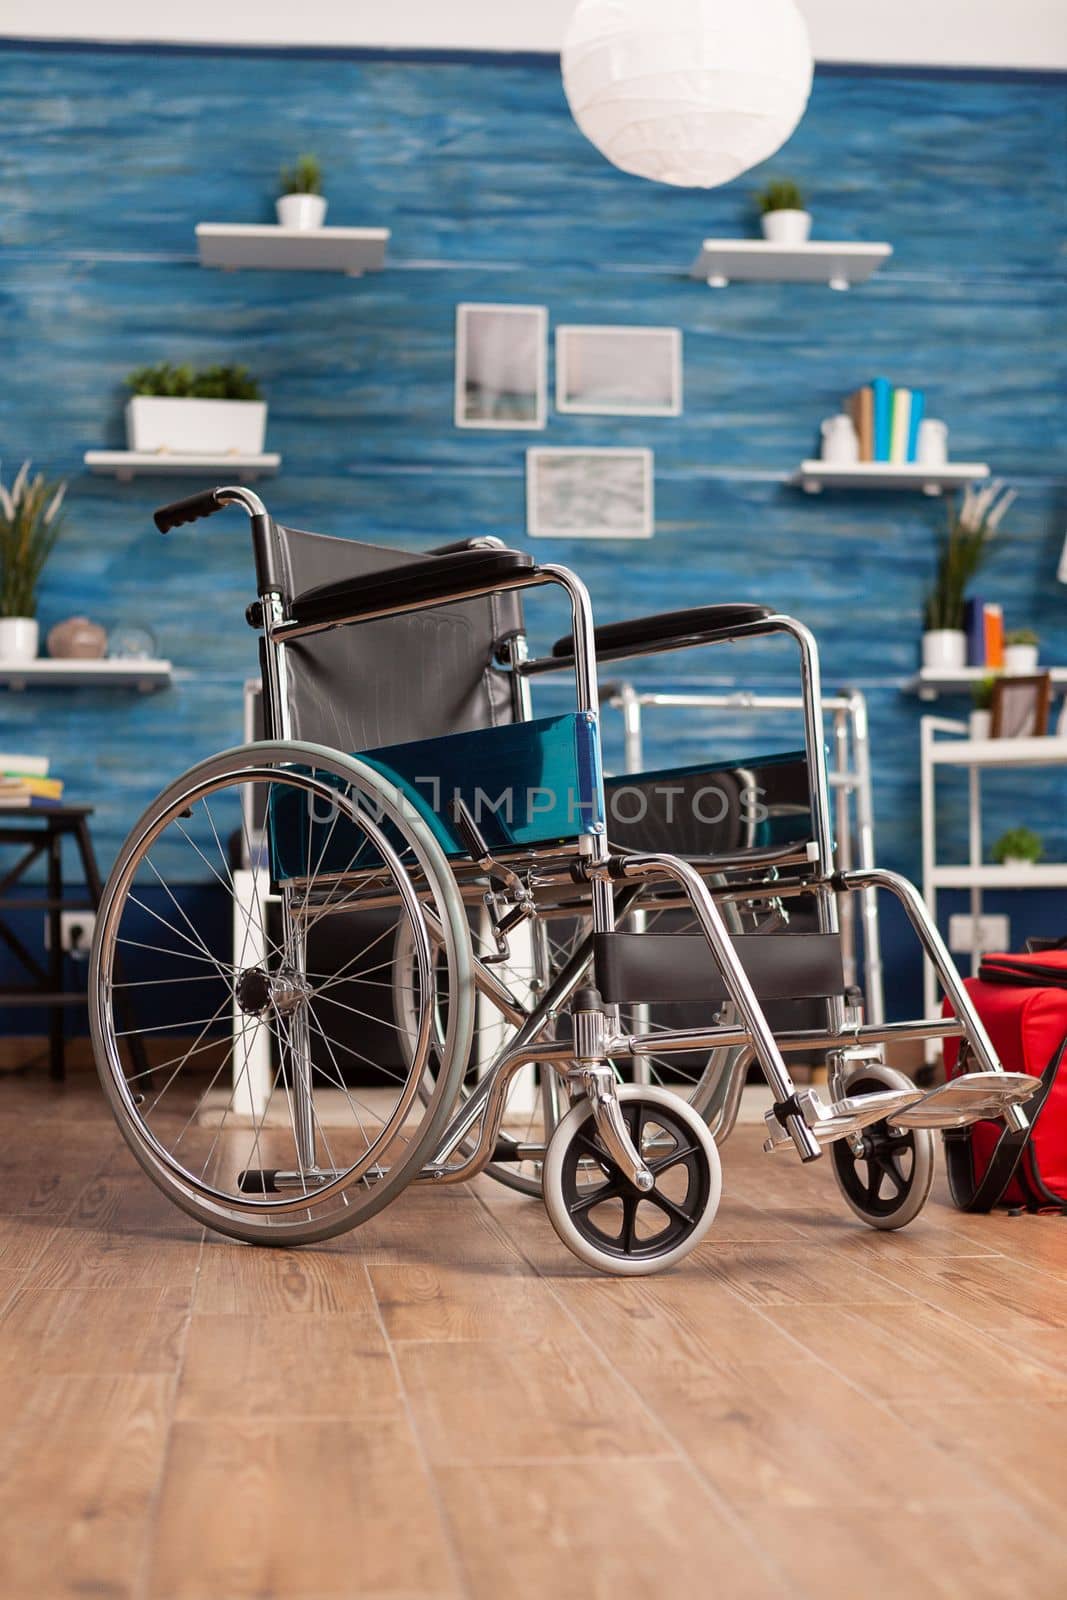 Wheelchair in nursing home room to aid mobility and recovery. Object designed to help people with physical disabilities to move from one space to another, friendly place for people with disability.